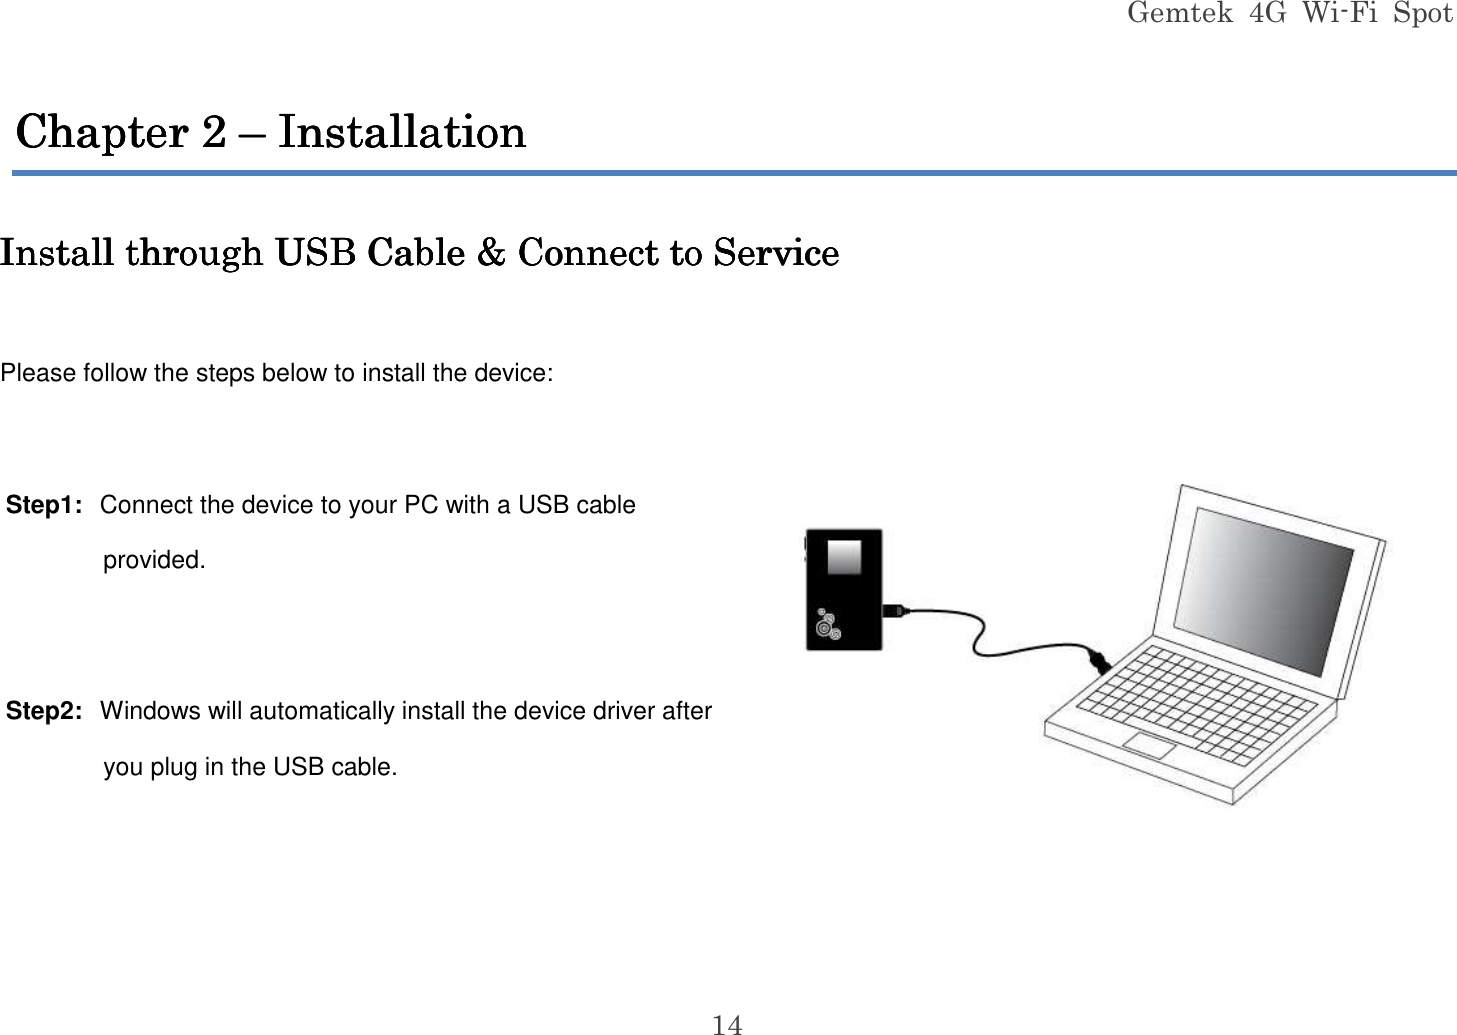 Gemtek  4G  Wi-Fi  Spot 14 Chapter Chapter Chapter Chapter 2222    –––– In In In Installationstallationstallationstallation     Install through USB Cable &amp; Connect to ServiceInstall through USB Cable &amp; Connect to ServiceInstall through USB Cable &amp; Connect to ServiceInstall through USB Cable &amp; Connect to Service     Please follow the steps below to install the device:  Step1:  Connect the device to your PC with a USB cable provided.  Step2:  Windows will automatically install the device driver after you plug in the USB cable.     